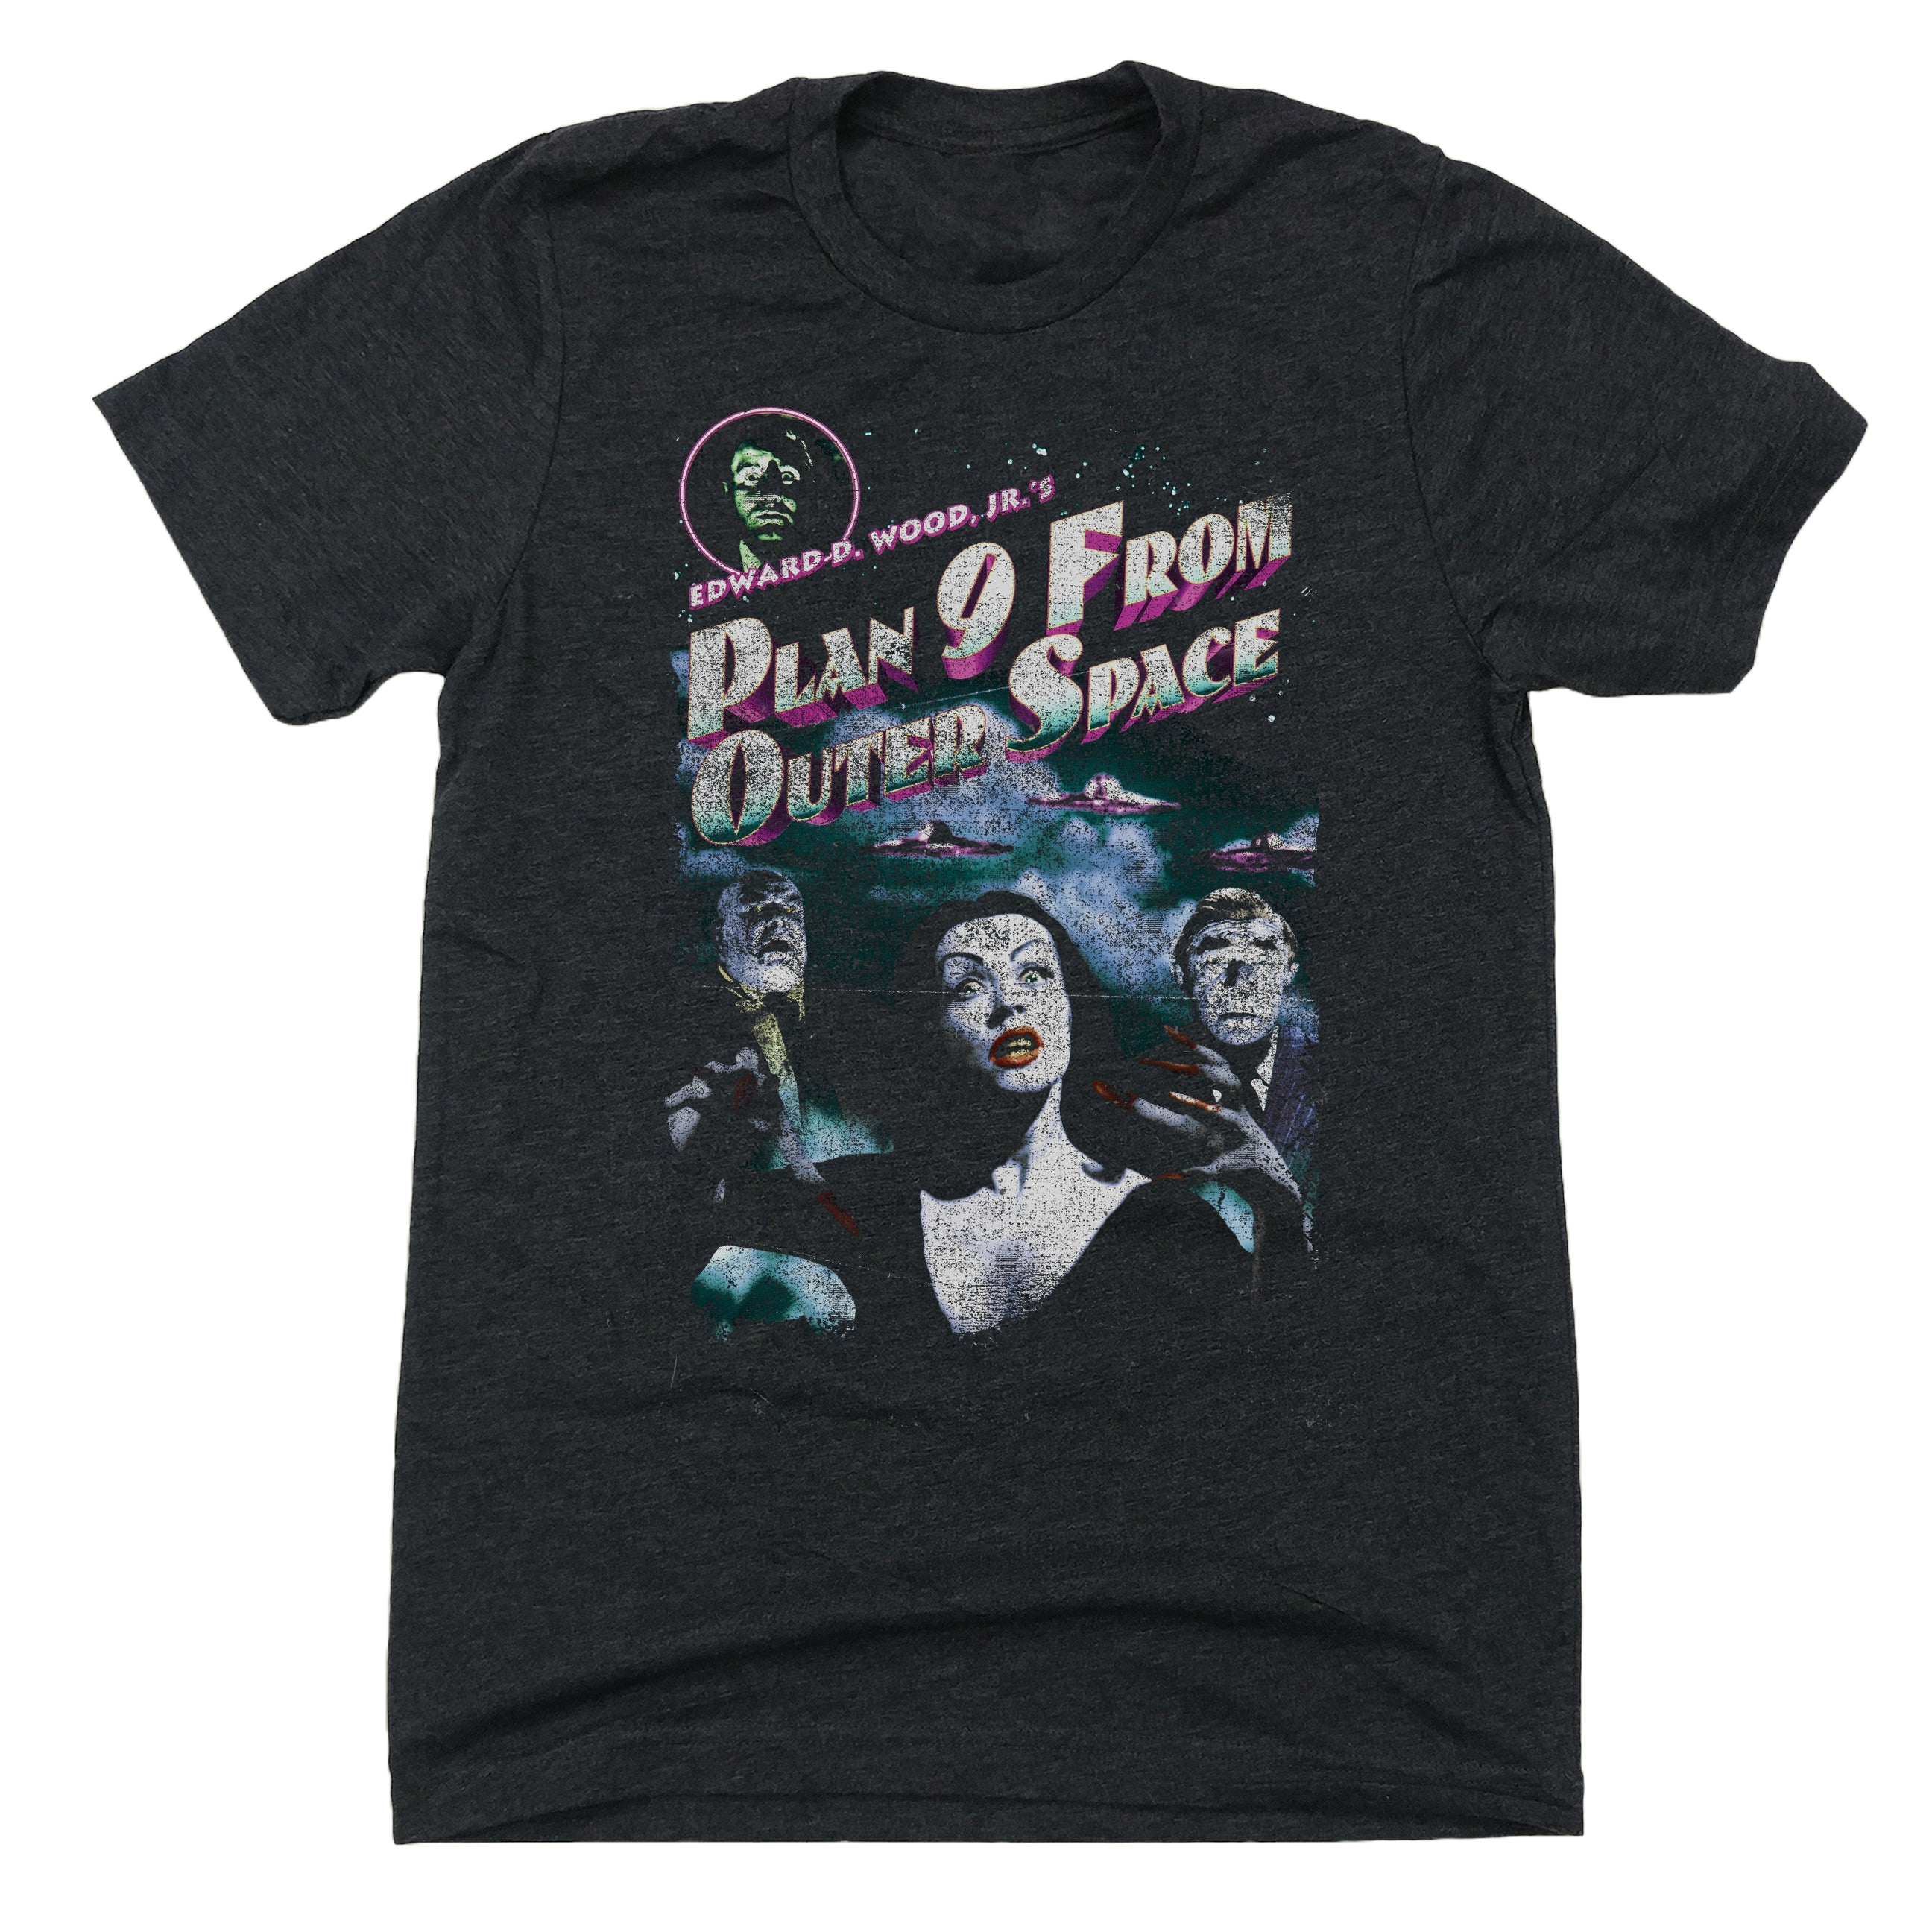 Plan 9 From Outer Space Unisex Tee